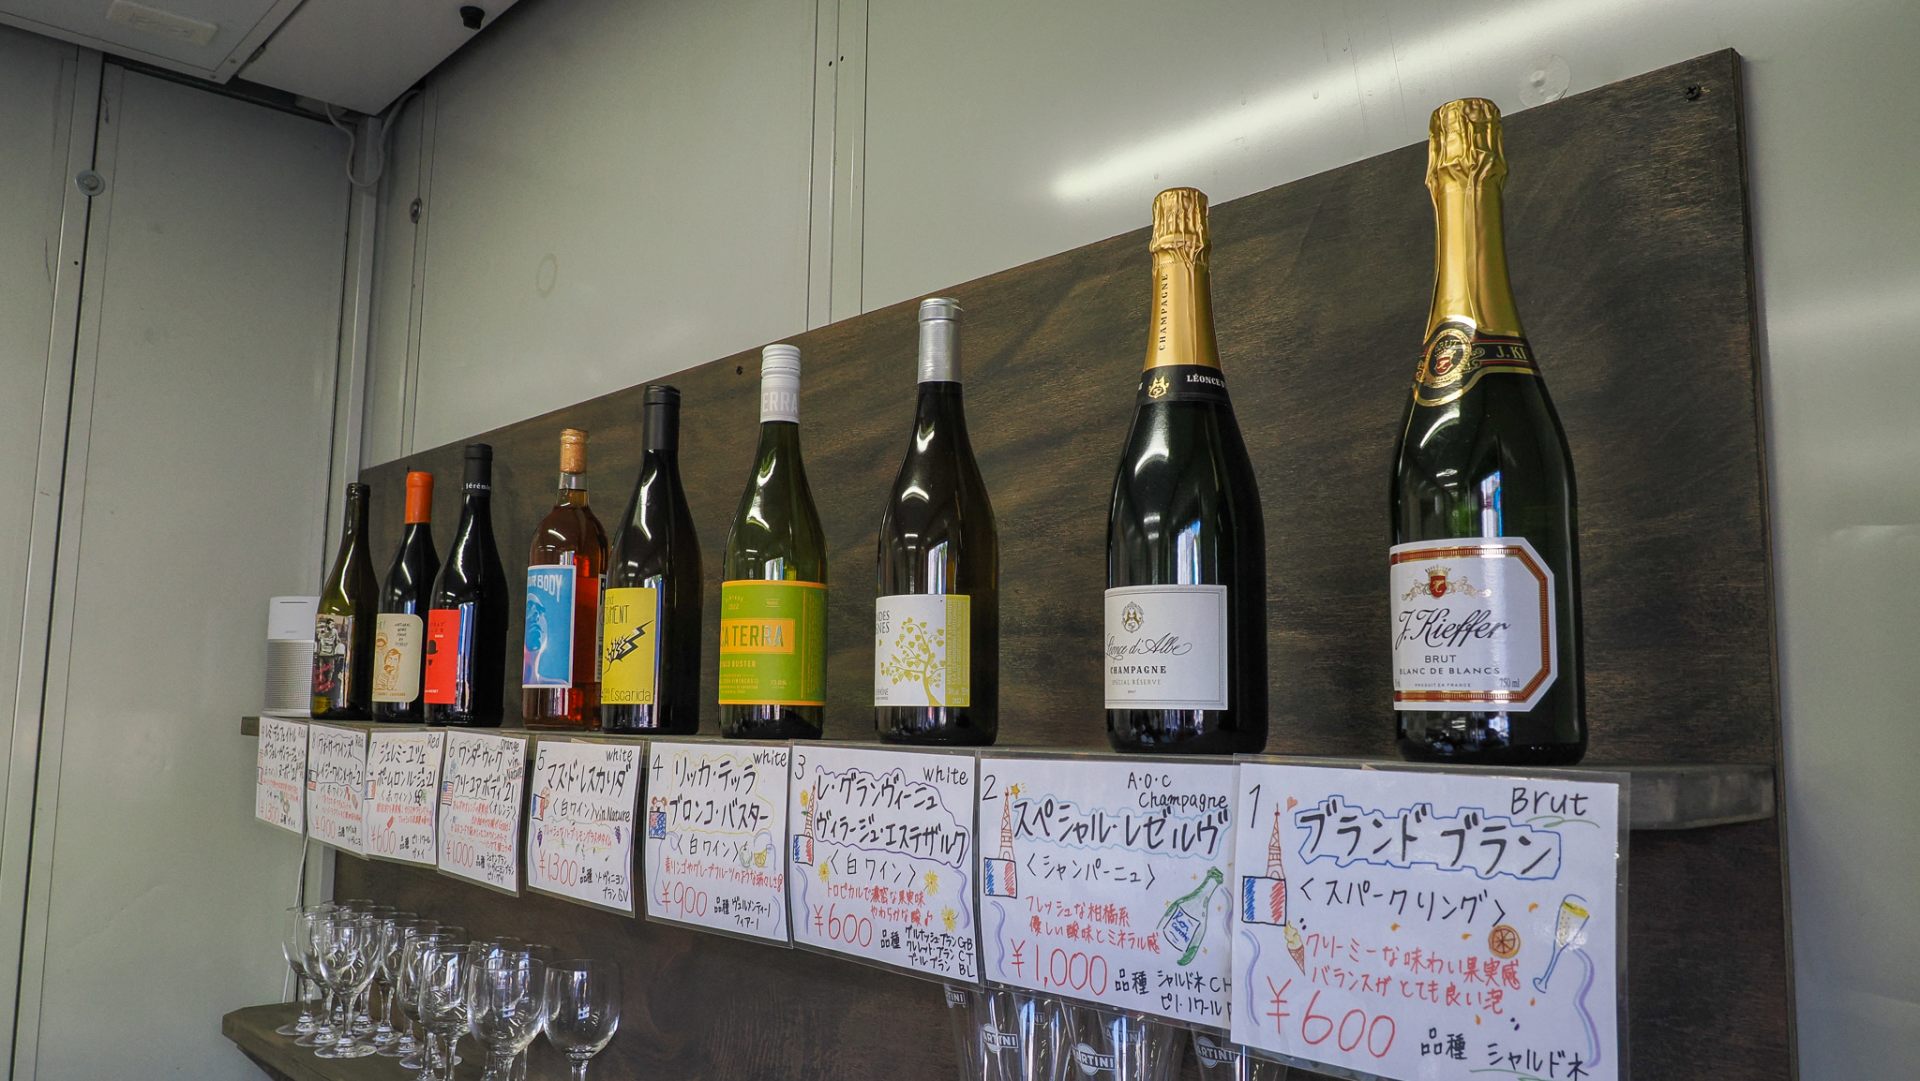 Wine lineup of "TATEOKA TAKESHI", the Sapporo Chef's Kitchen of the days at the site "PRECIOUS TABLE" at Odorikoen 11-chome